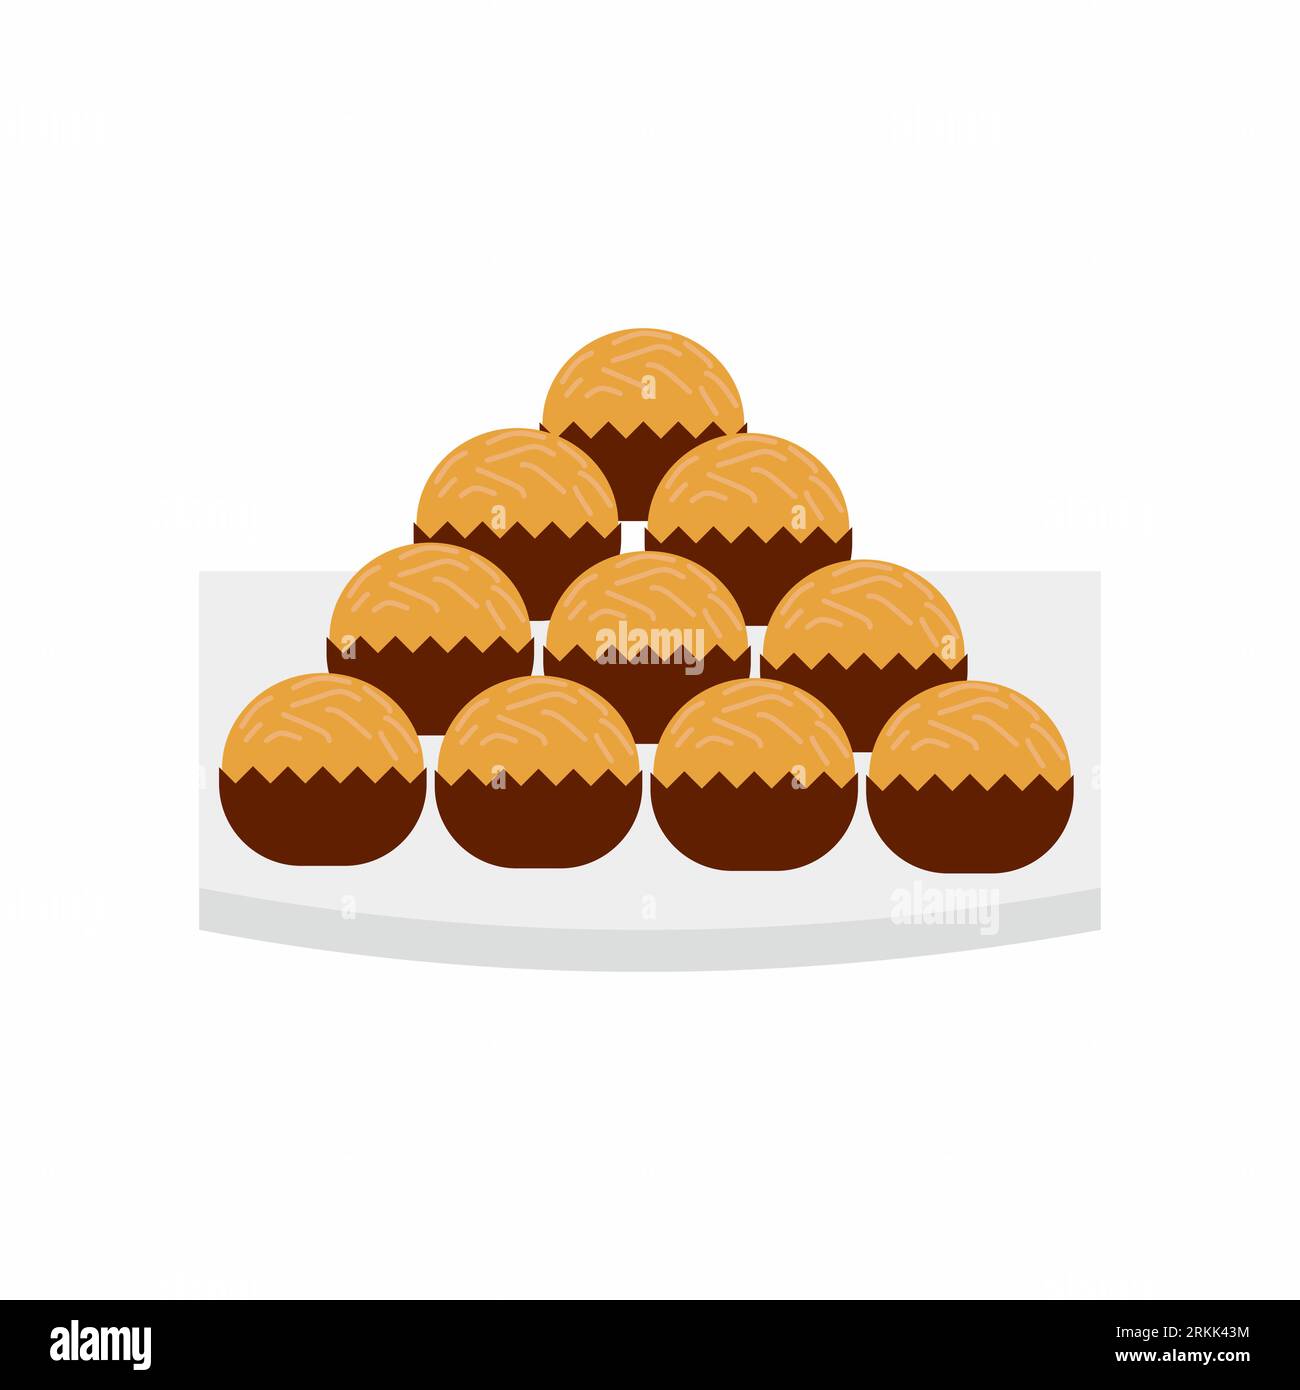 Cake for idul fitri isolated on white background. Sweet cake for islamic celebration with flat element style. Stock Vector